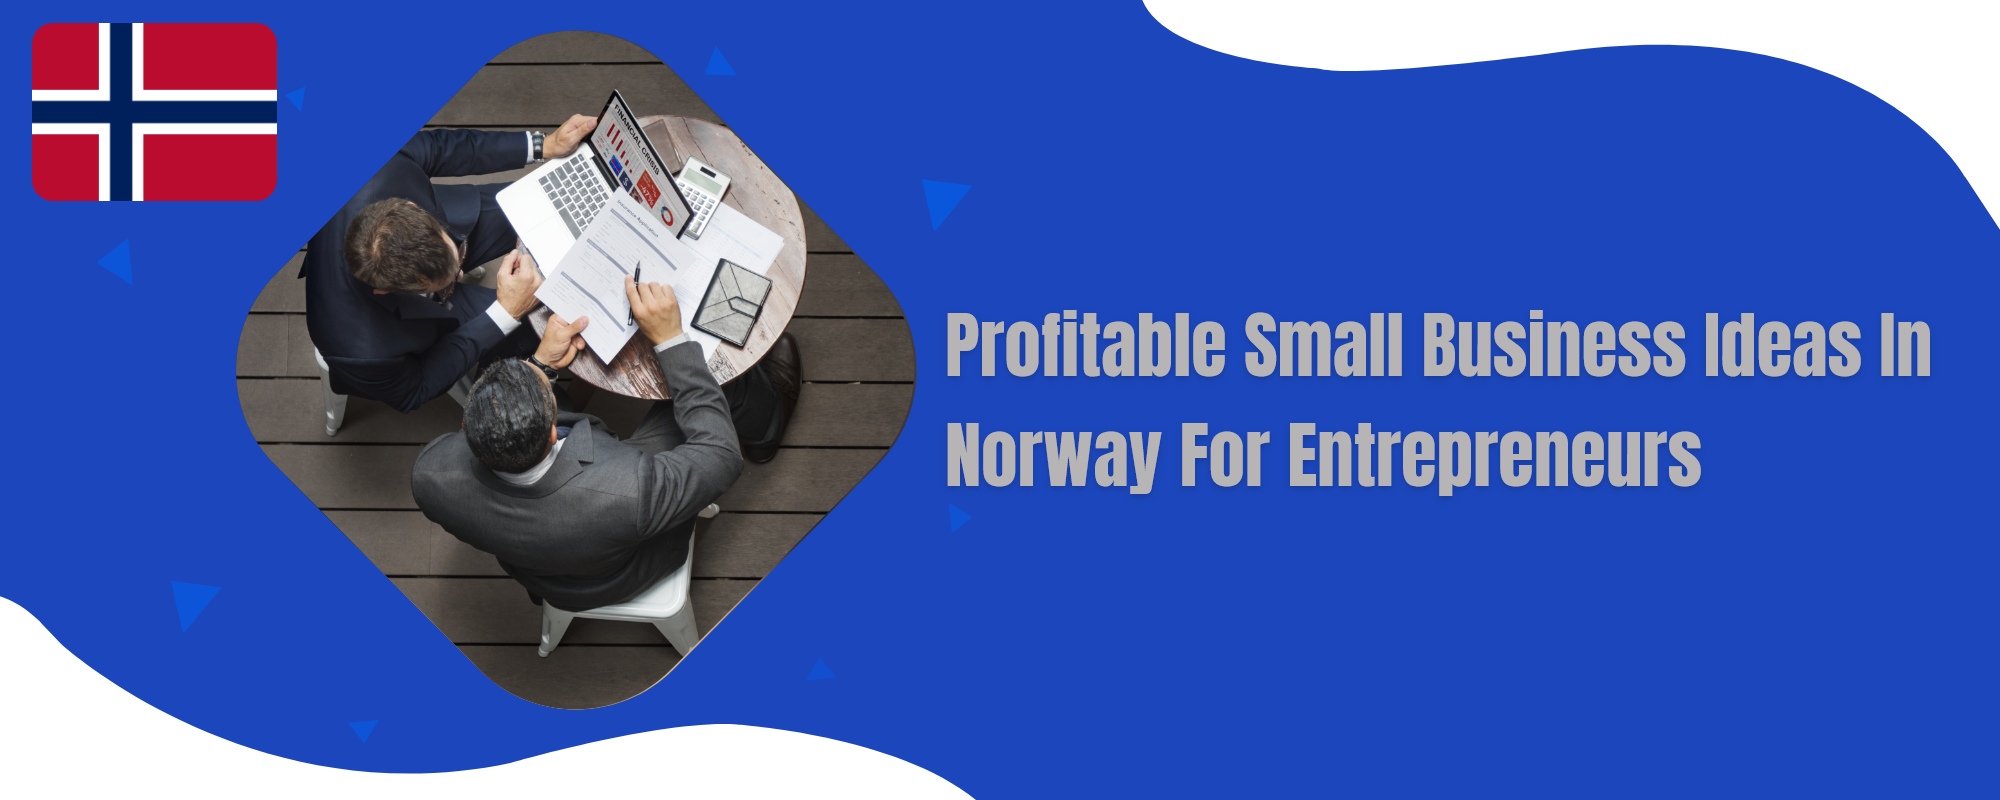 Profitable Small Business Ideas in Norway